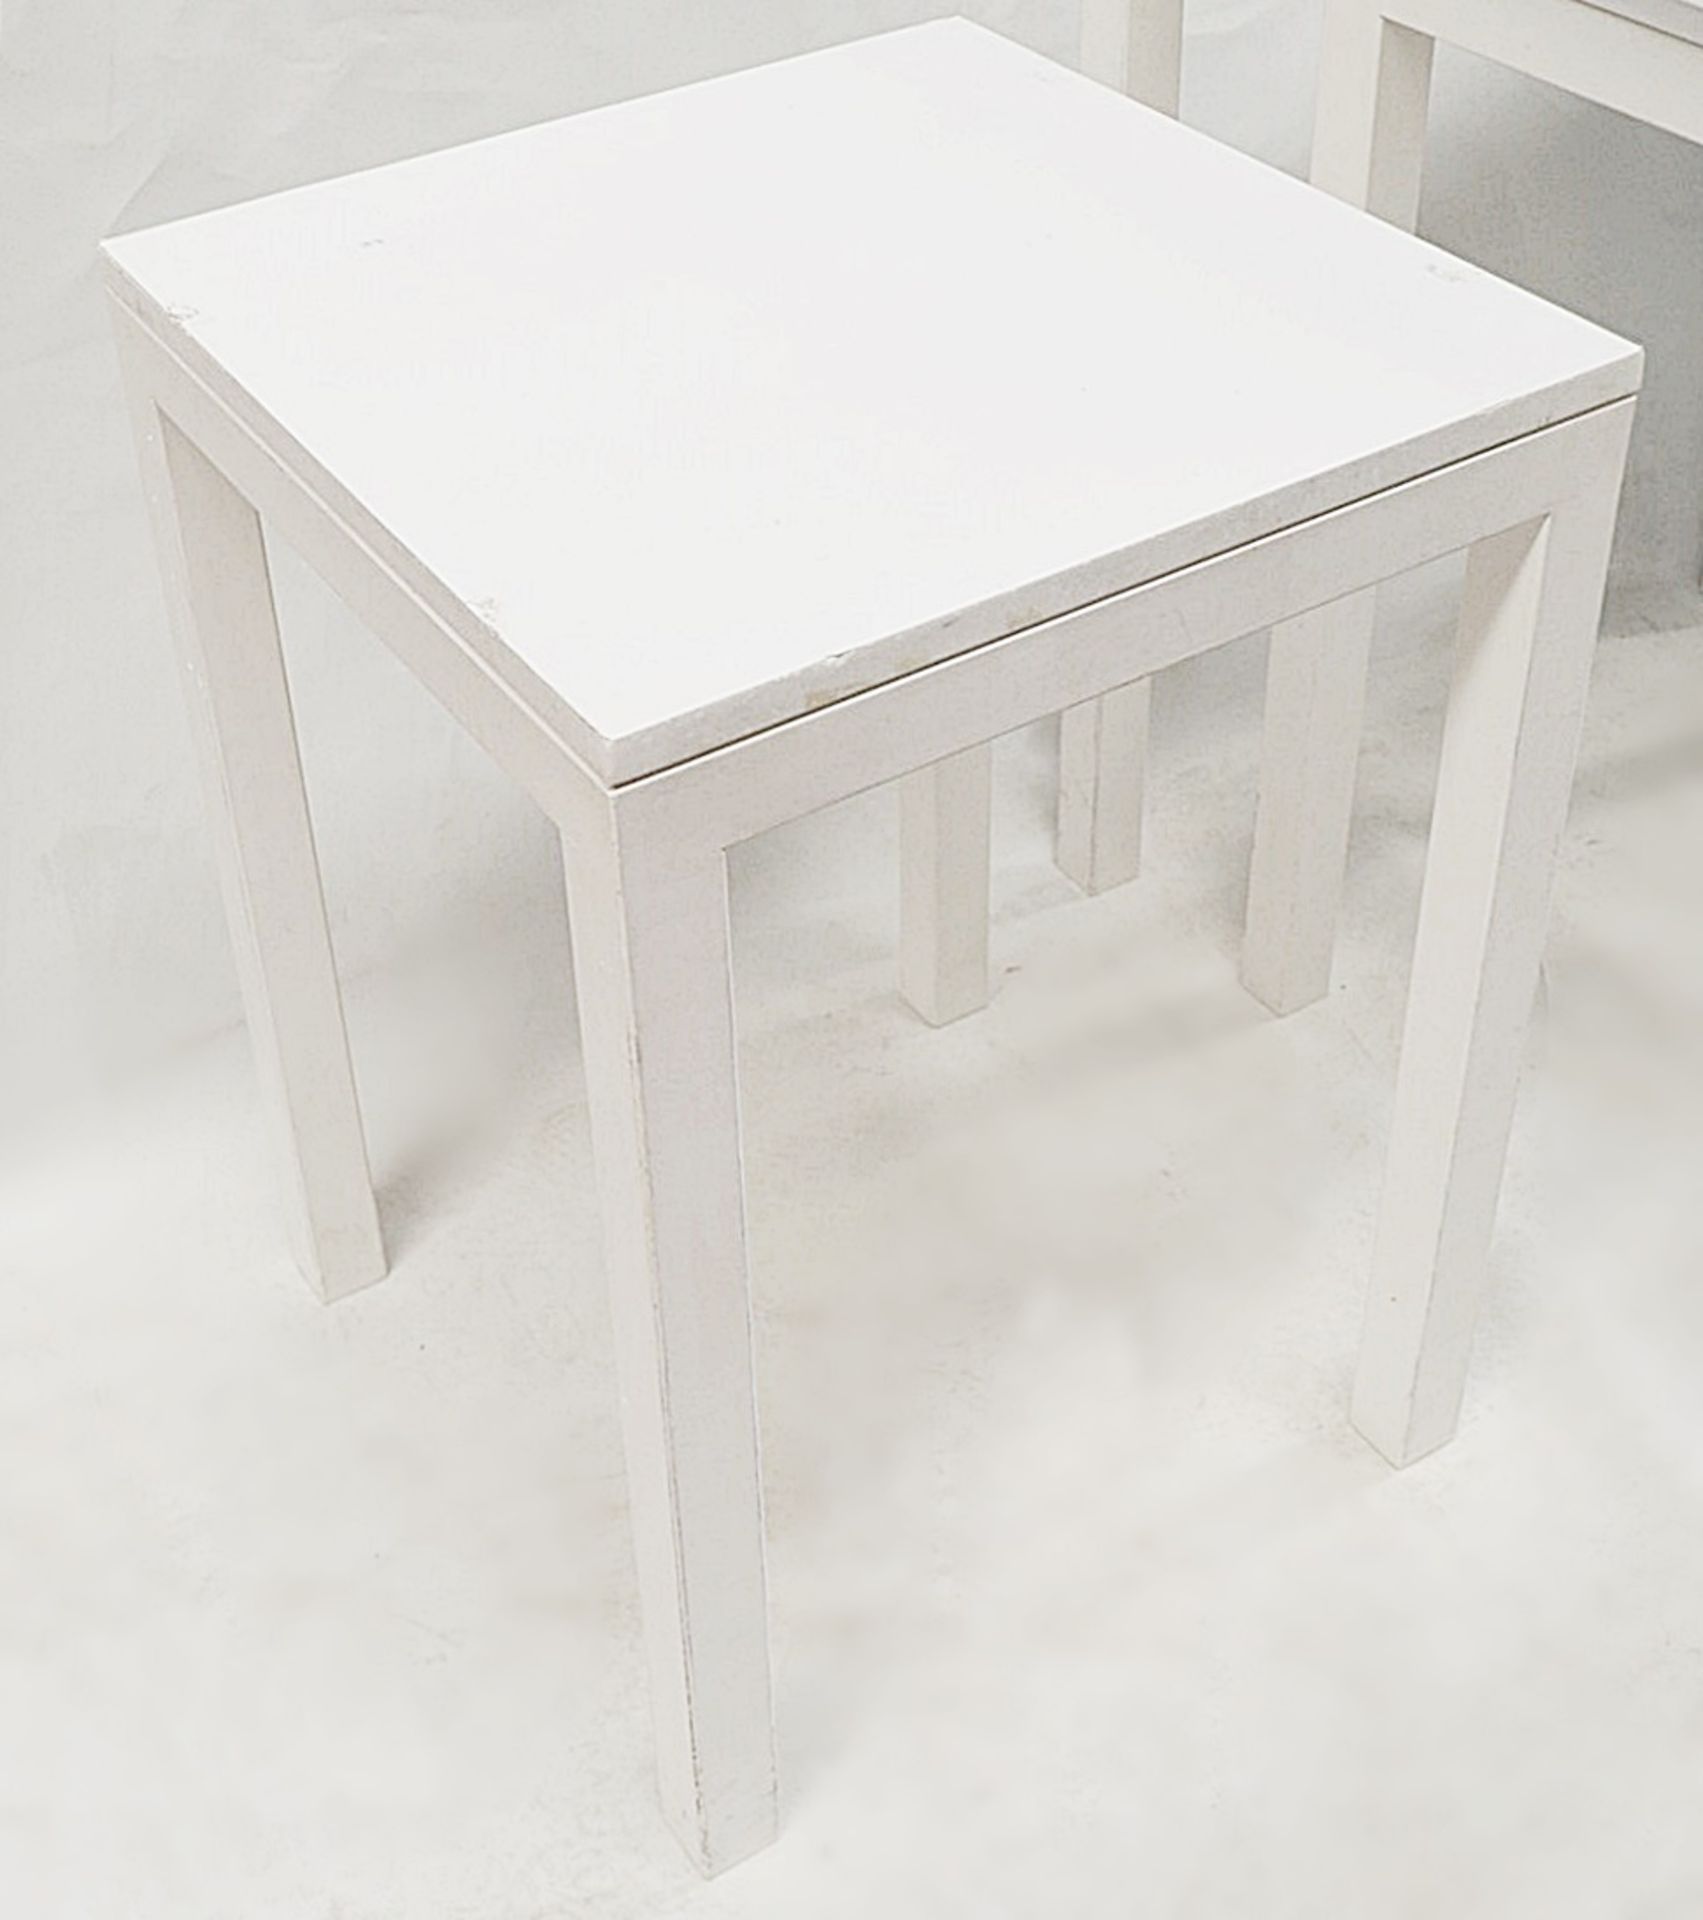 Set Of 3 x Stone Topped Retail Shop Display Metal Nesting Tables In White - Image 3 of 5